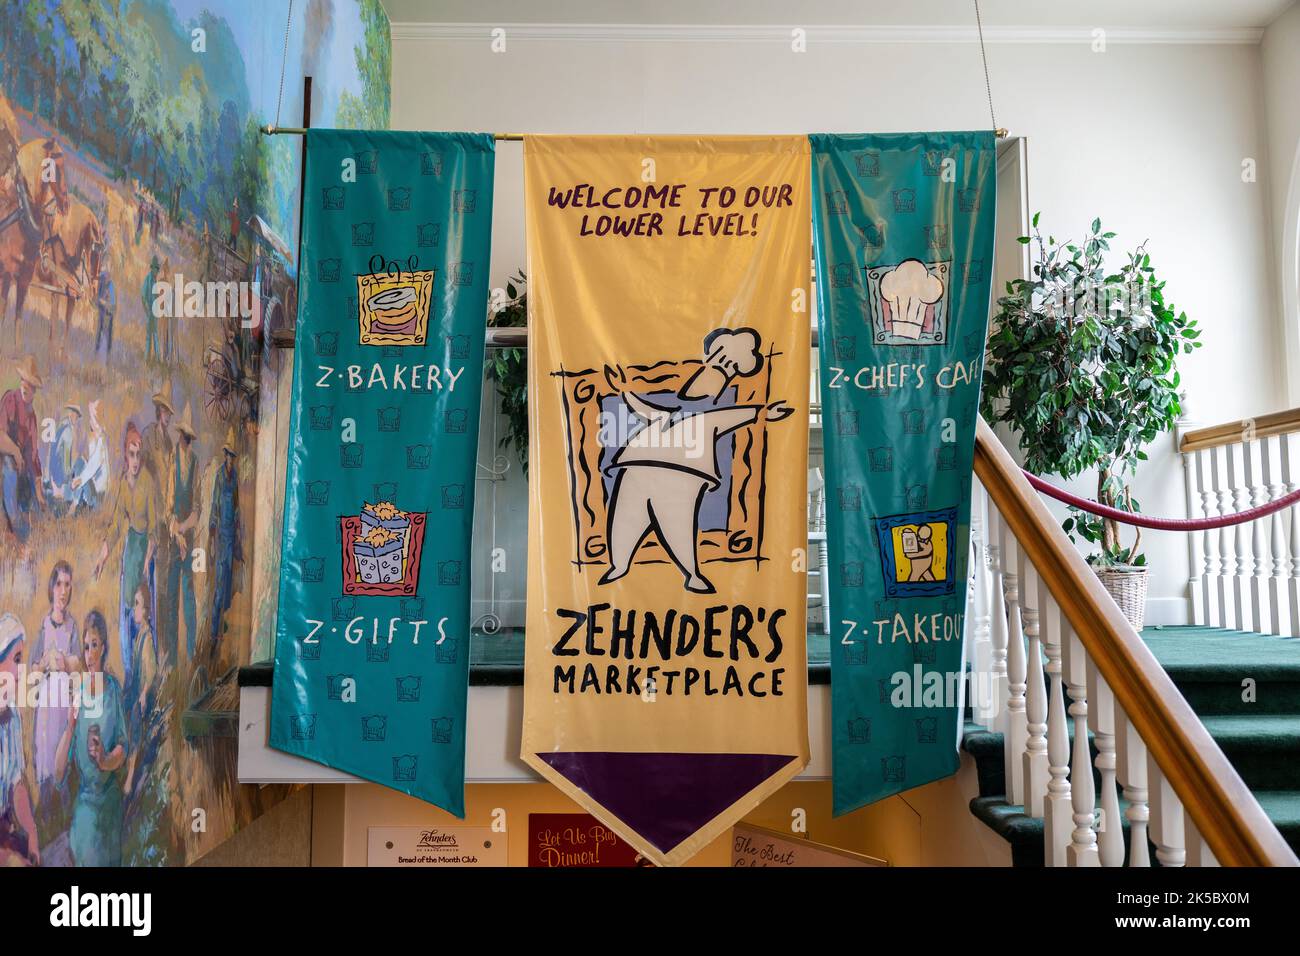 Zehnders Marketplace Signs To The Lower Level Shops And Cafe In The Basement Of Zehnder's Famous Chicken Restaurant Frankenmuth Michigan USA Stock Photo